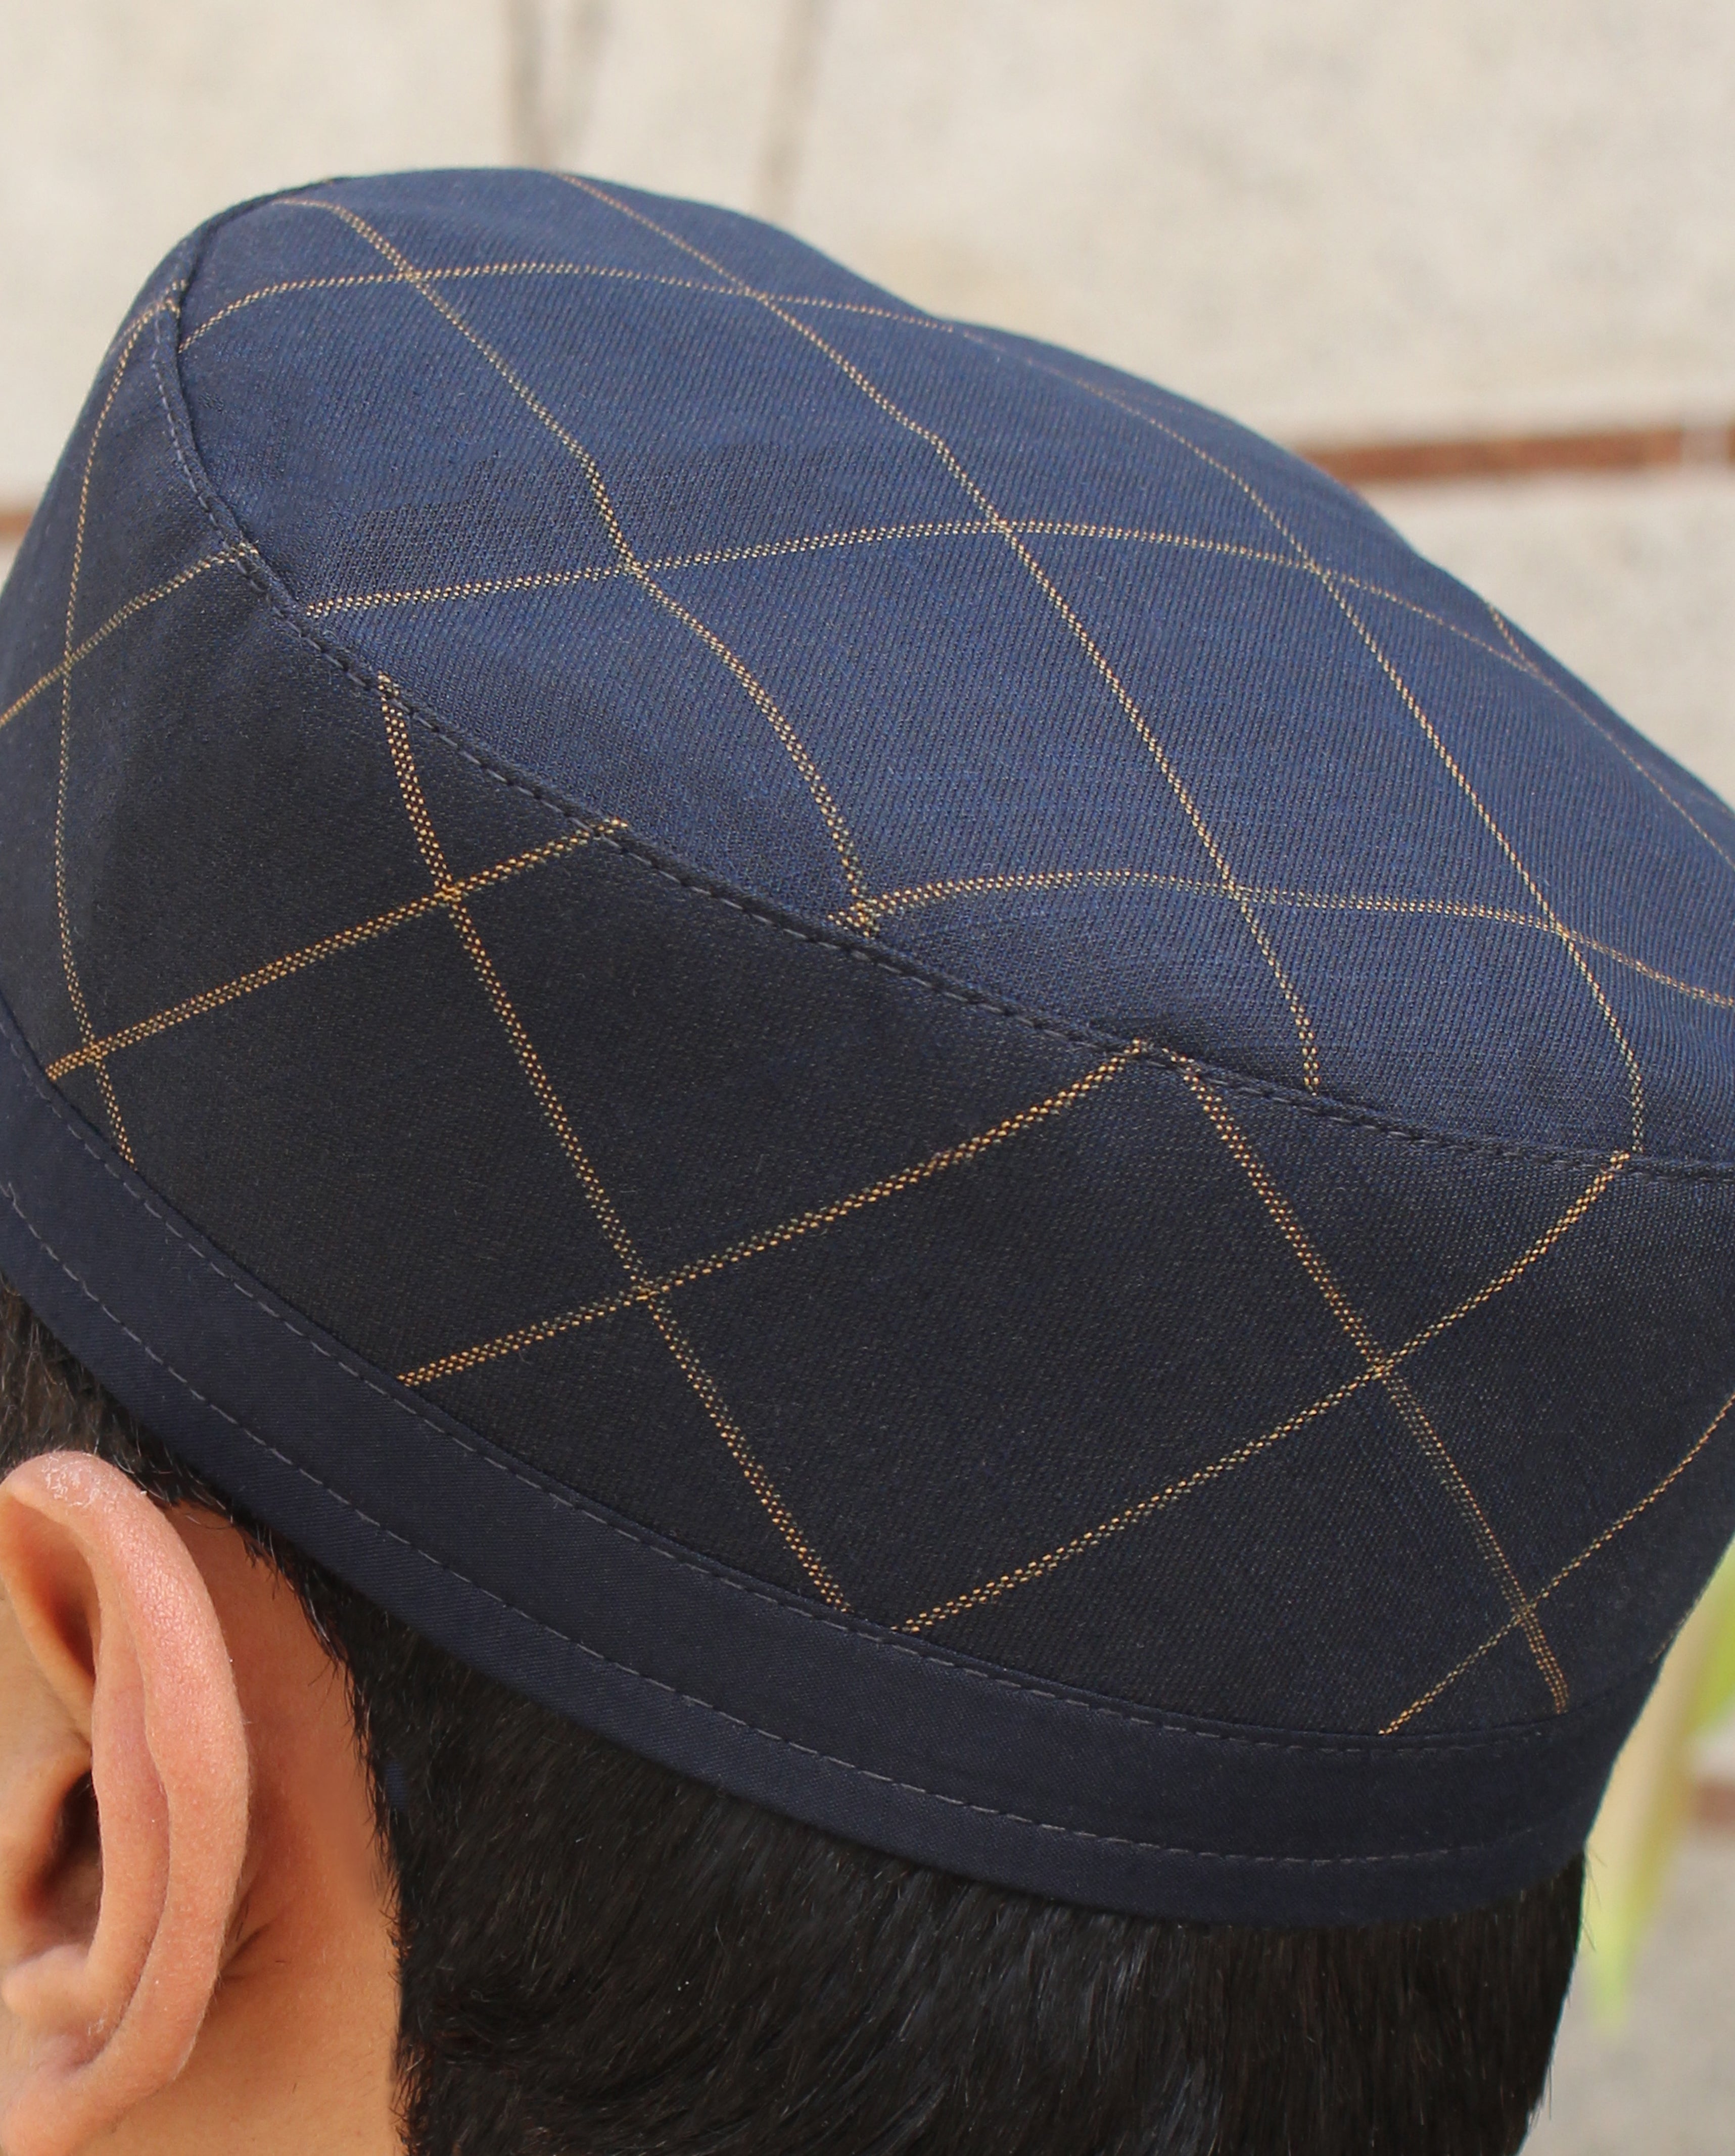 R035 -NAVY BLUE CHECKED WITH NAVY BLUE